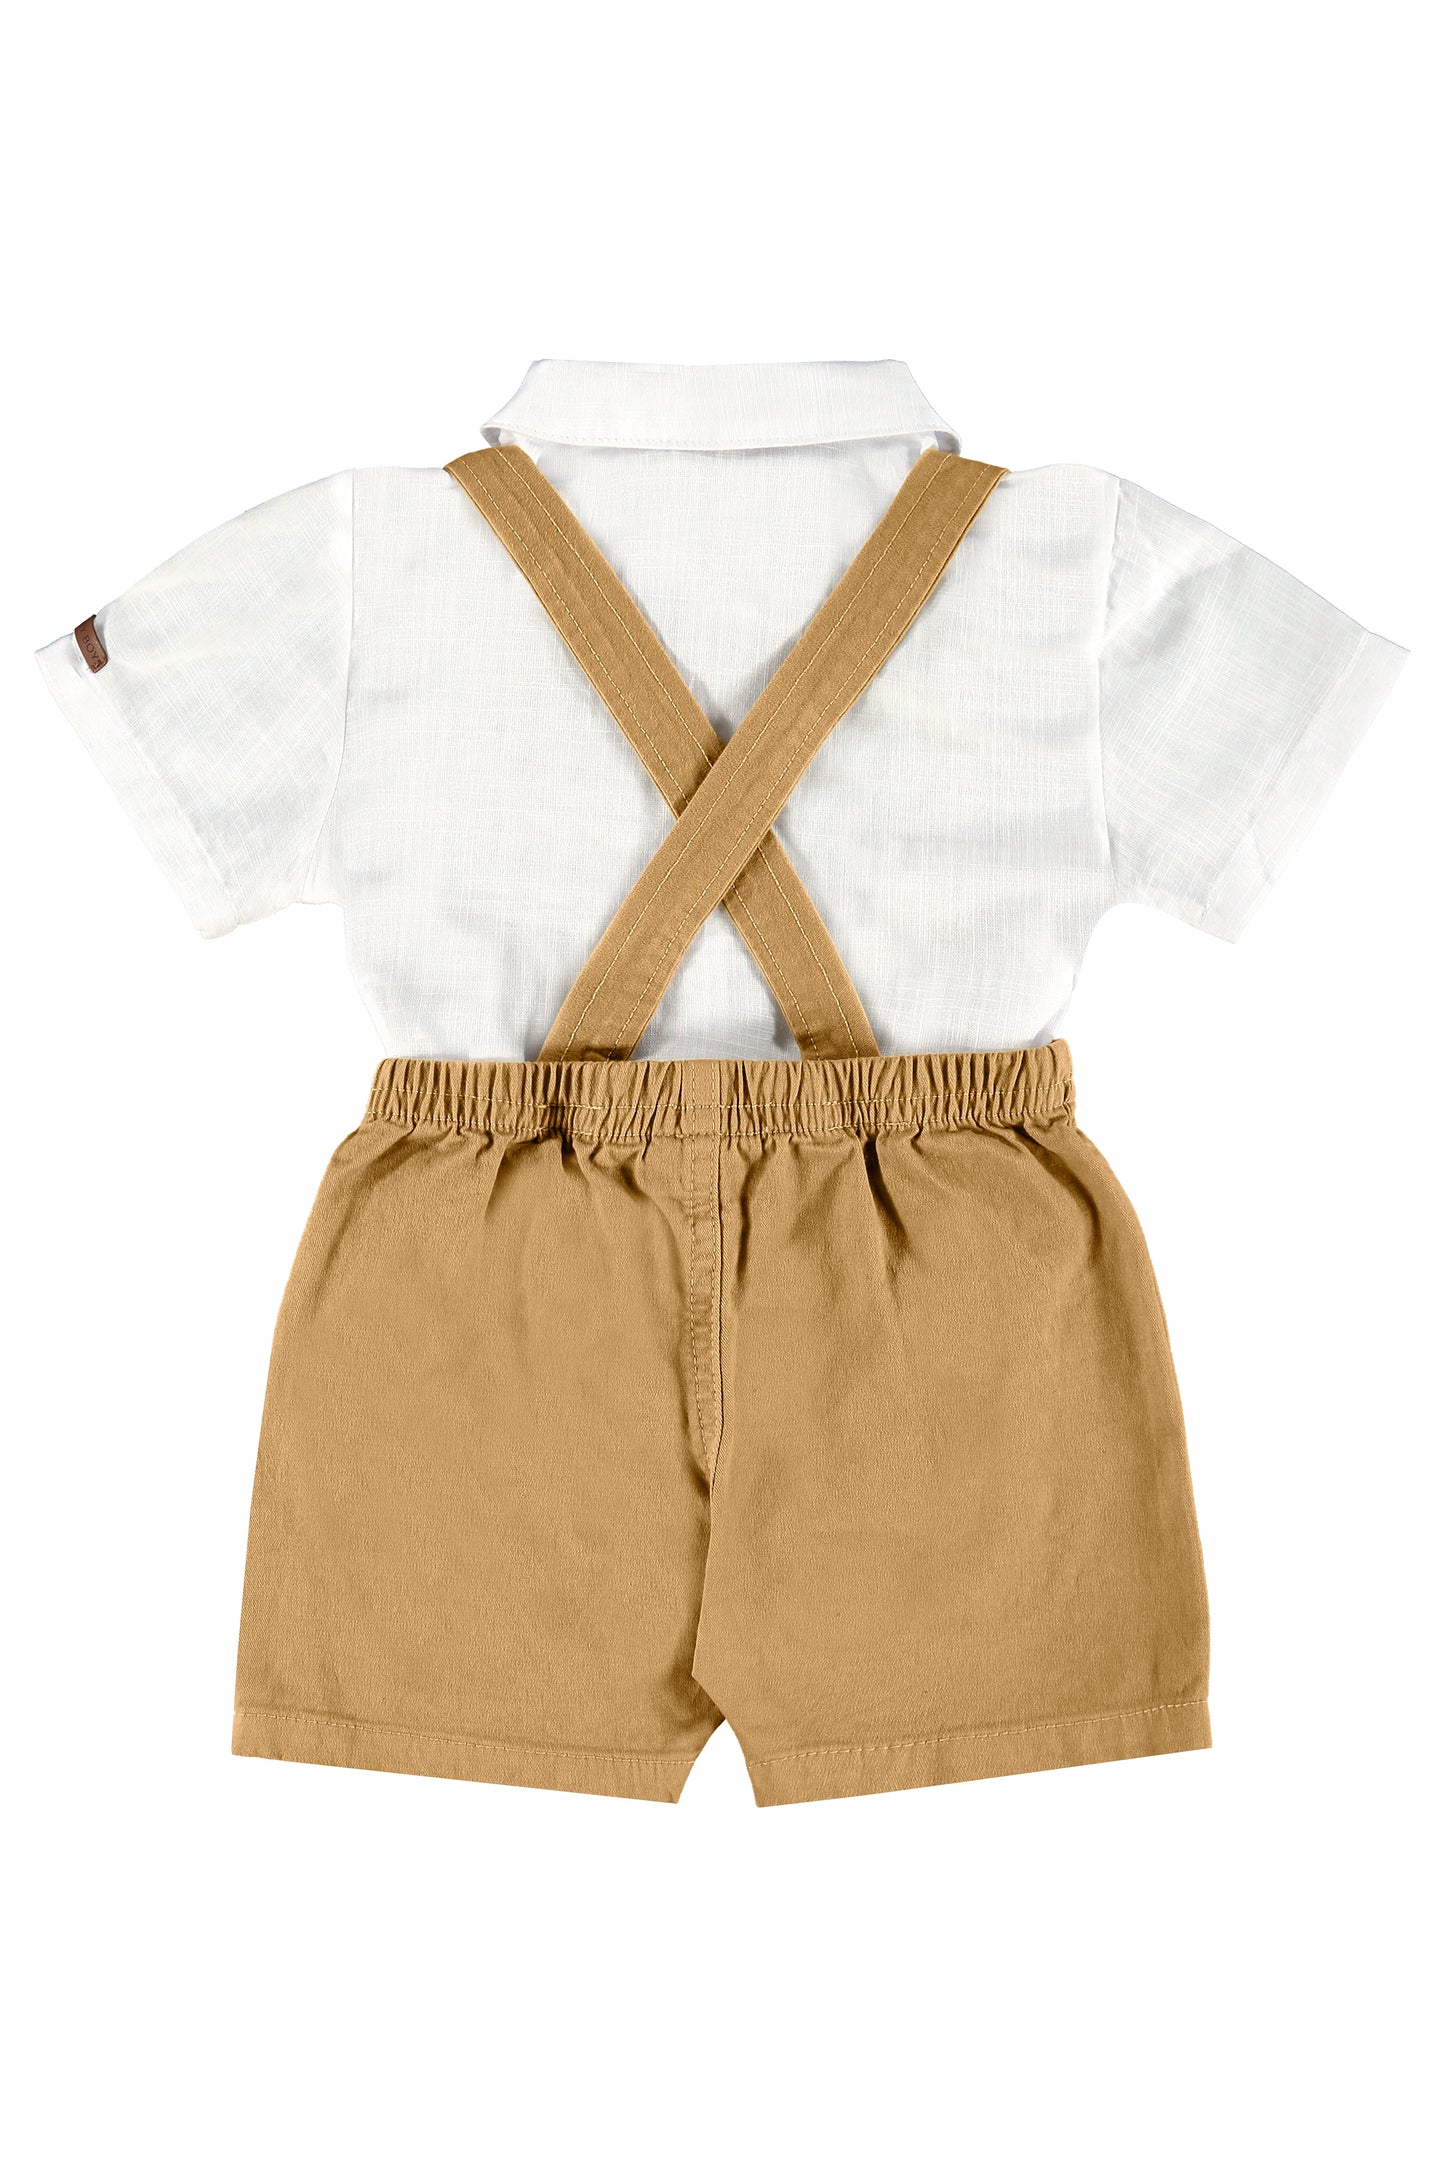 Woven Bodysuit & Twill Shorts with Suspenders